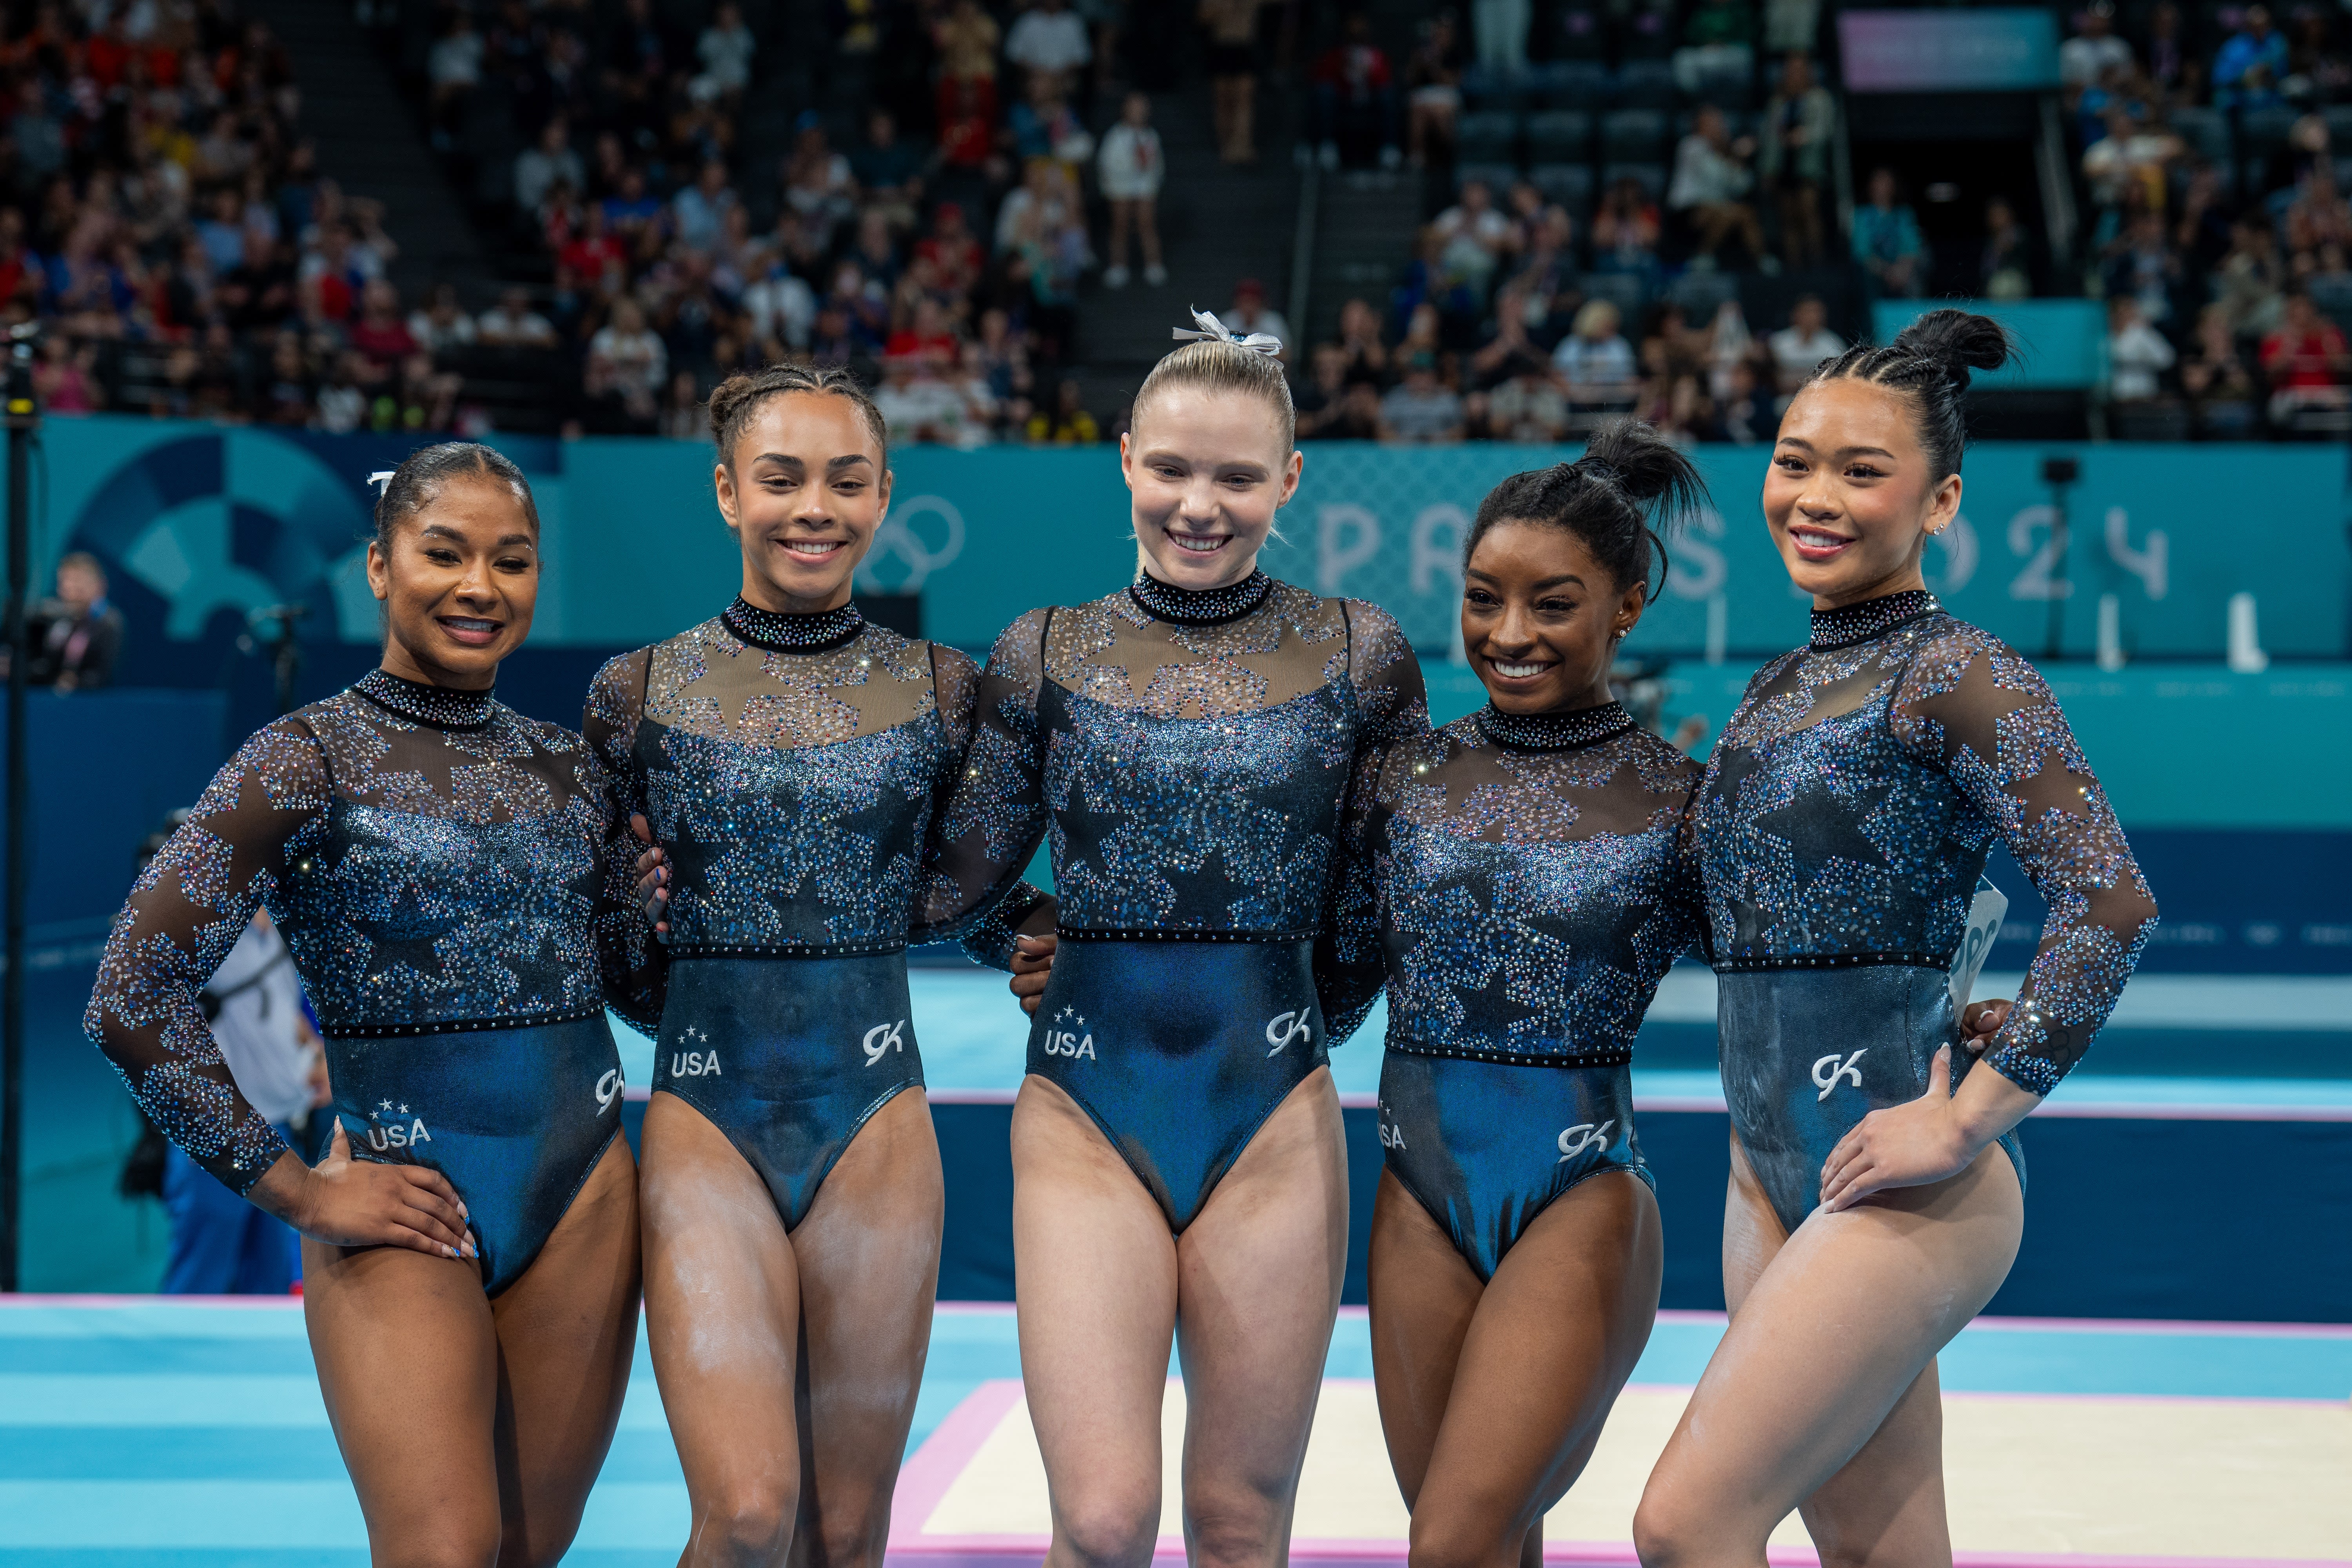 The US Women’s Gymnastics Team Name Means Business